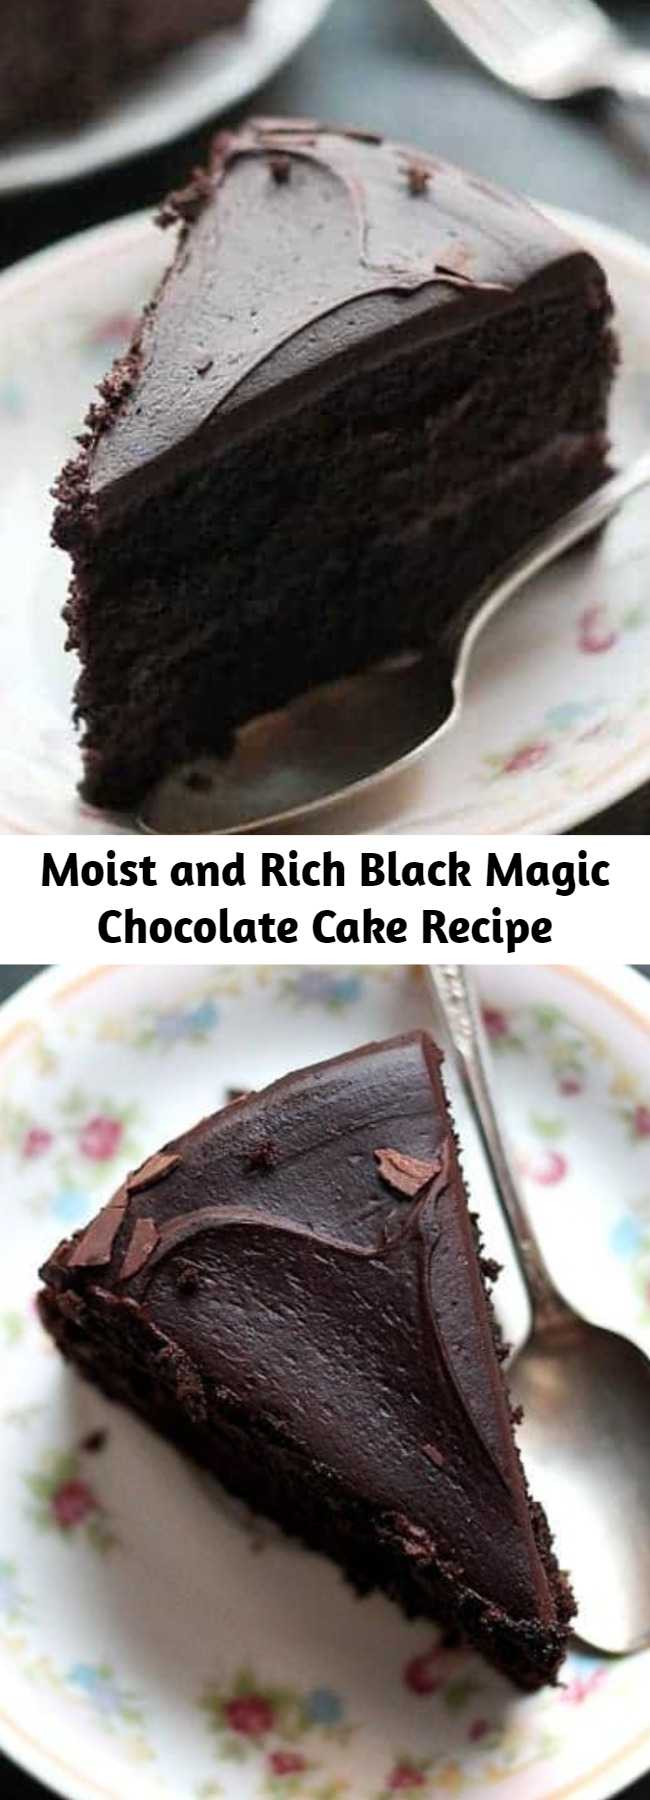 Moist and Rich Black Magic Chocolate Cake Recipe - This is my go-to chocolate cake recipe. Moist, rich, and delicious dark chocolate cake that’s perfect for the Holidays, or any other occasion! Perfect for Valentine's Day!